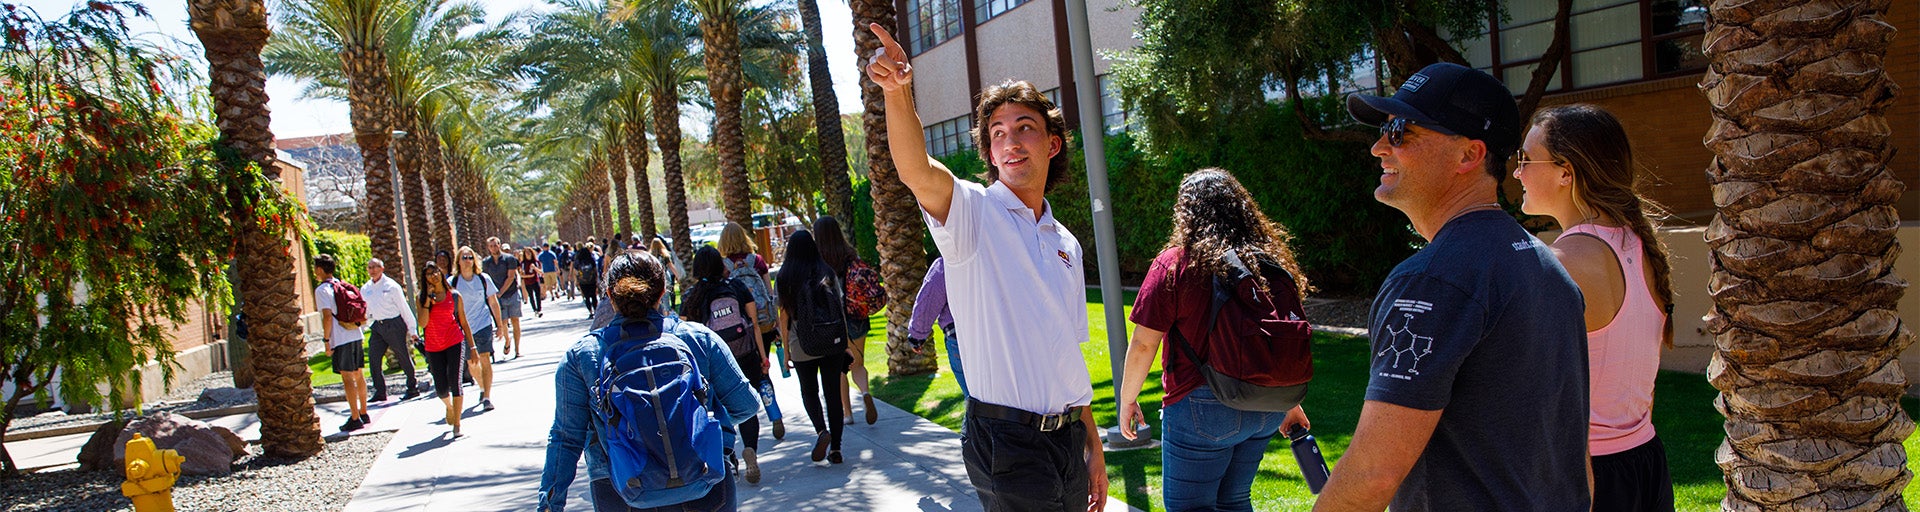 ASU tour guide showing prospective students and family members around campus